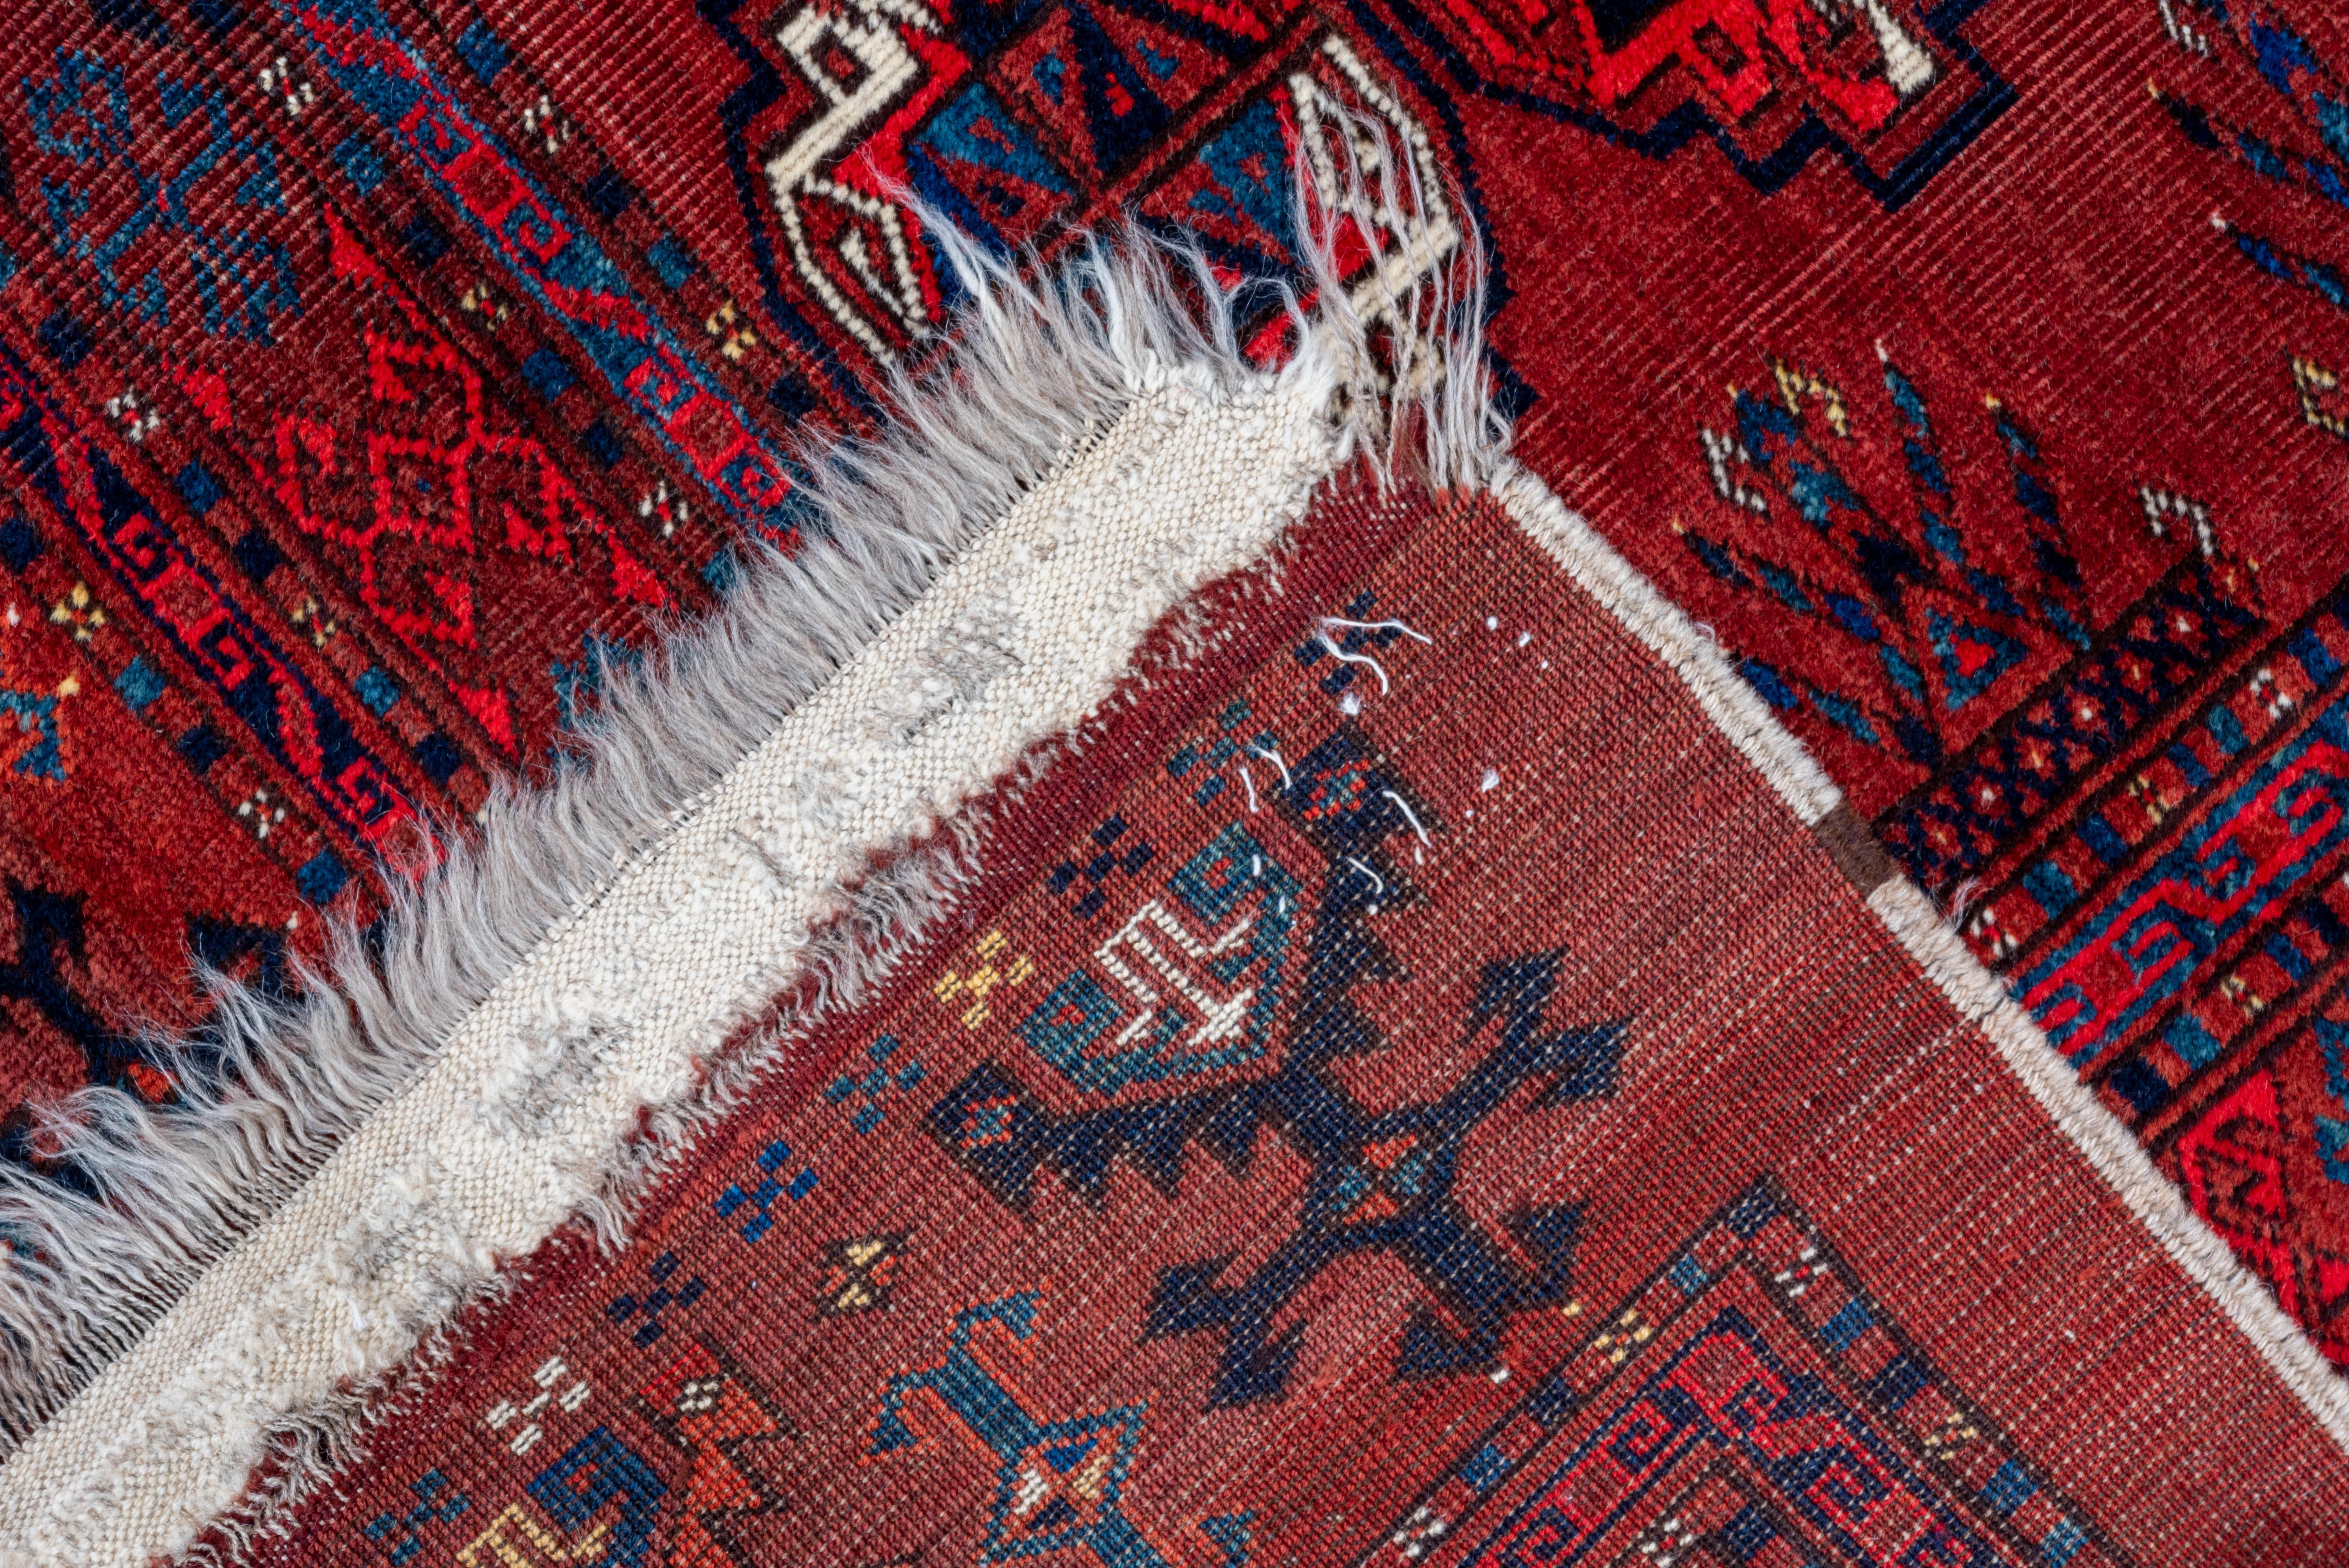 Turkoman Traditional Triabl Rug in Reds and Blacks In Good Condition For Sale In New York, NY